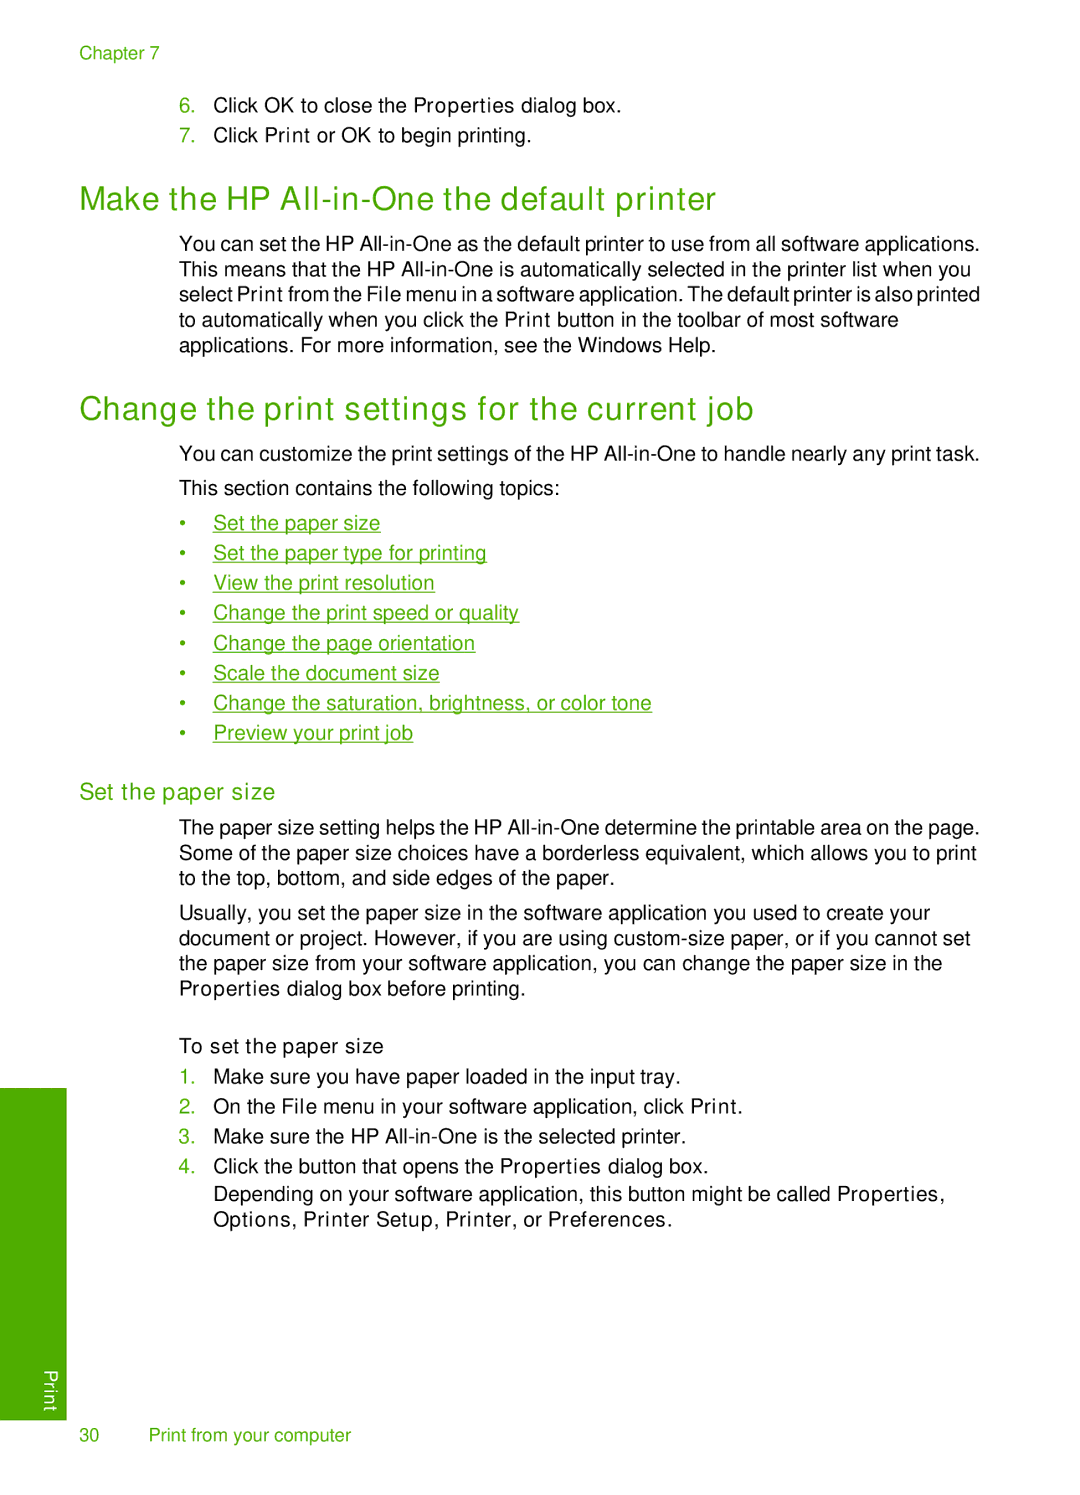 HP F4172 Make the HP All-in-One the default printer, Change the print settings for the current job, Set the paper size 